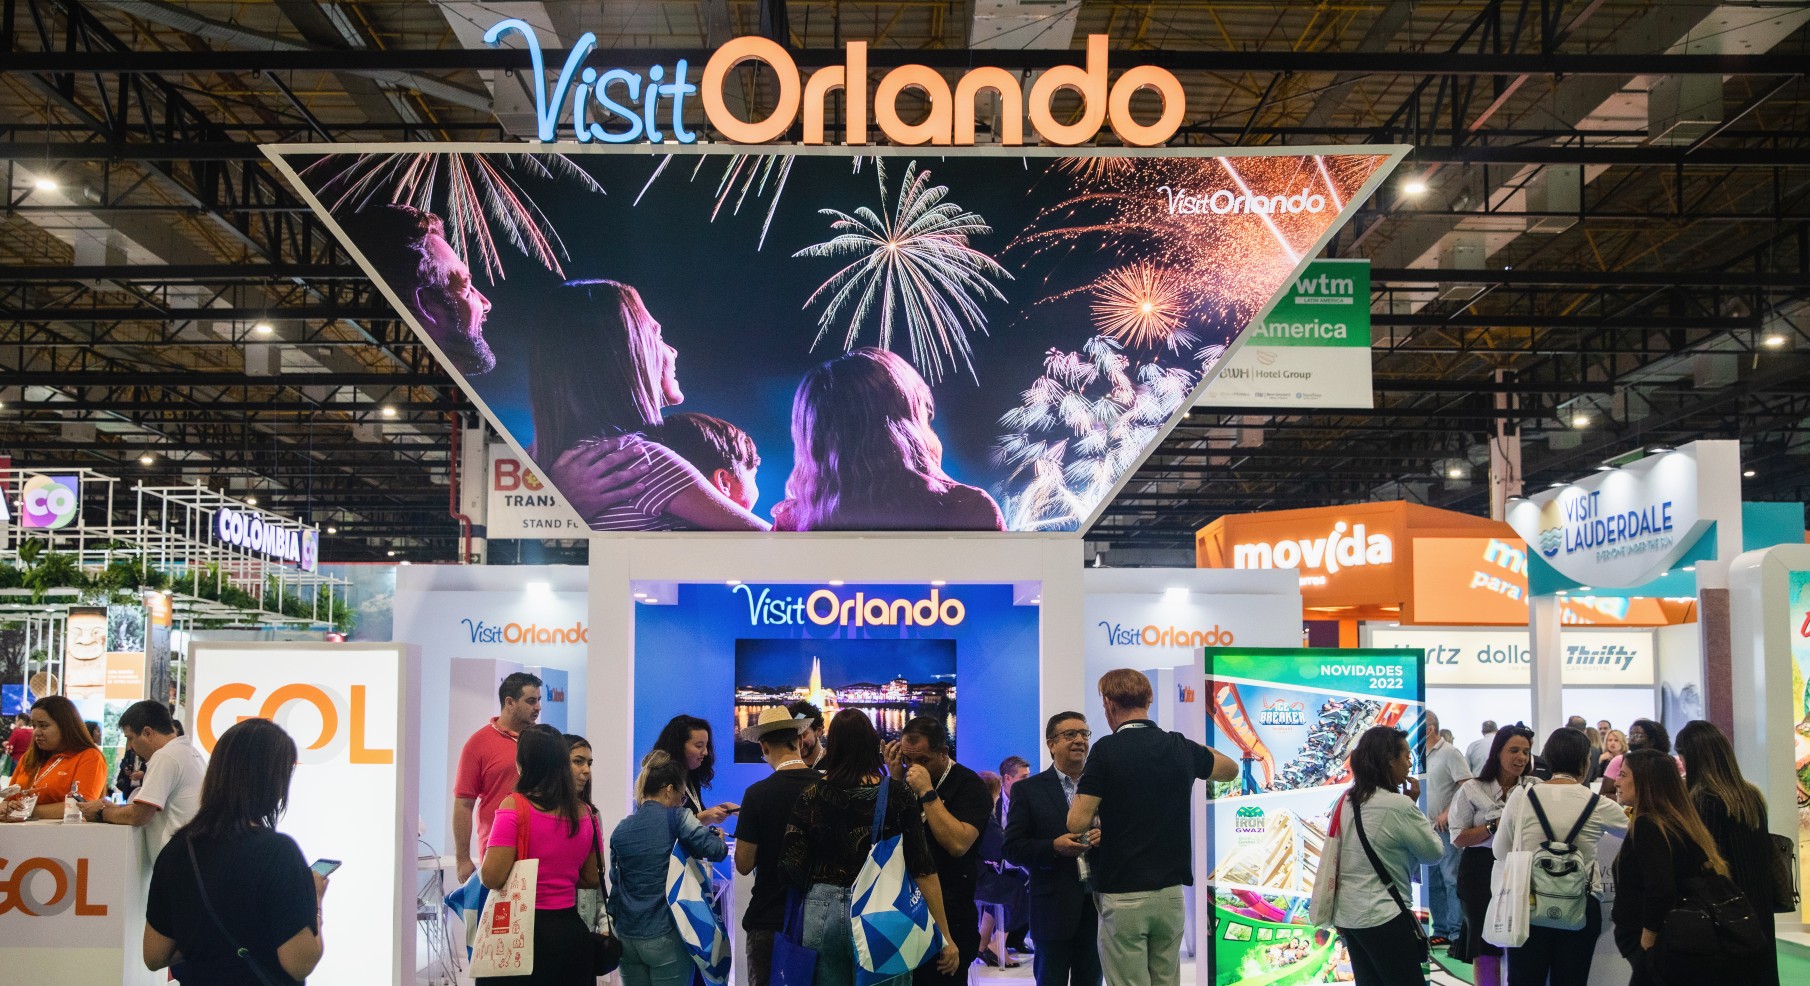 Visit Orlando team members traveled to Sao Paulo, Brazil to participate in World Travel Market.